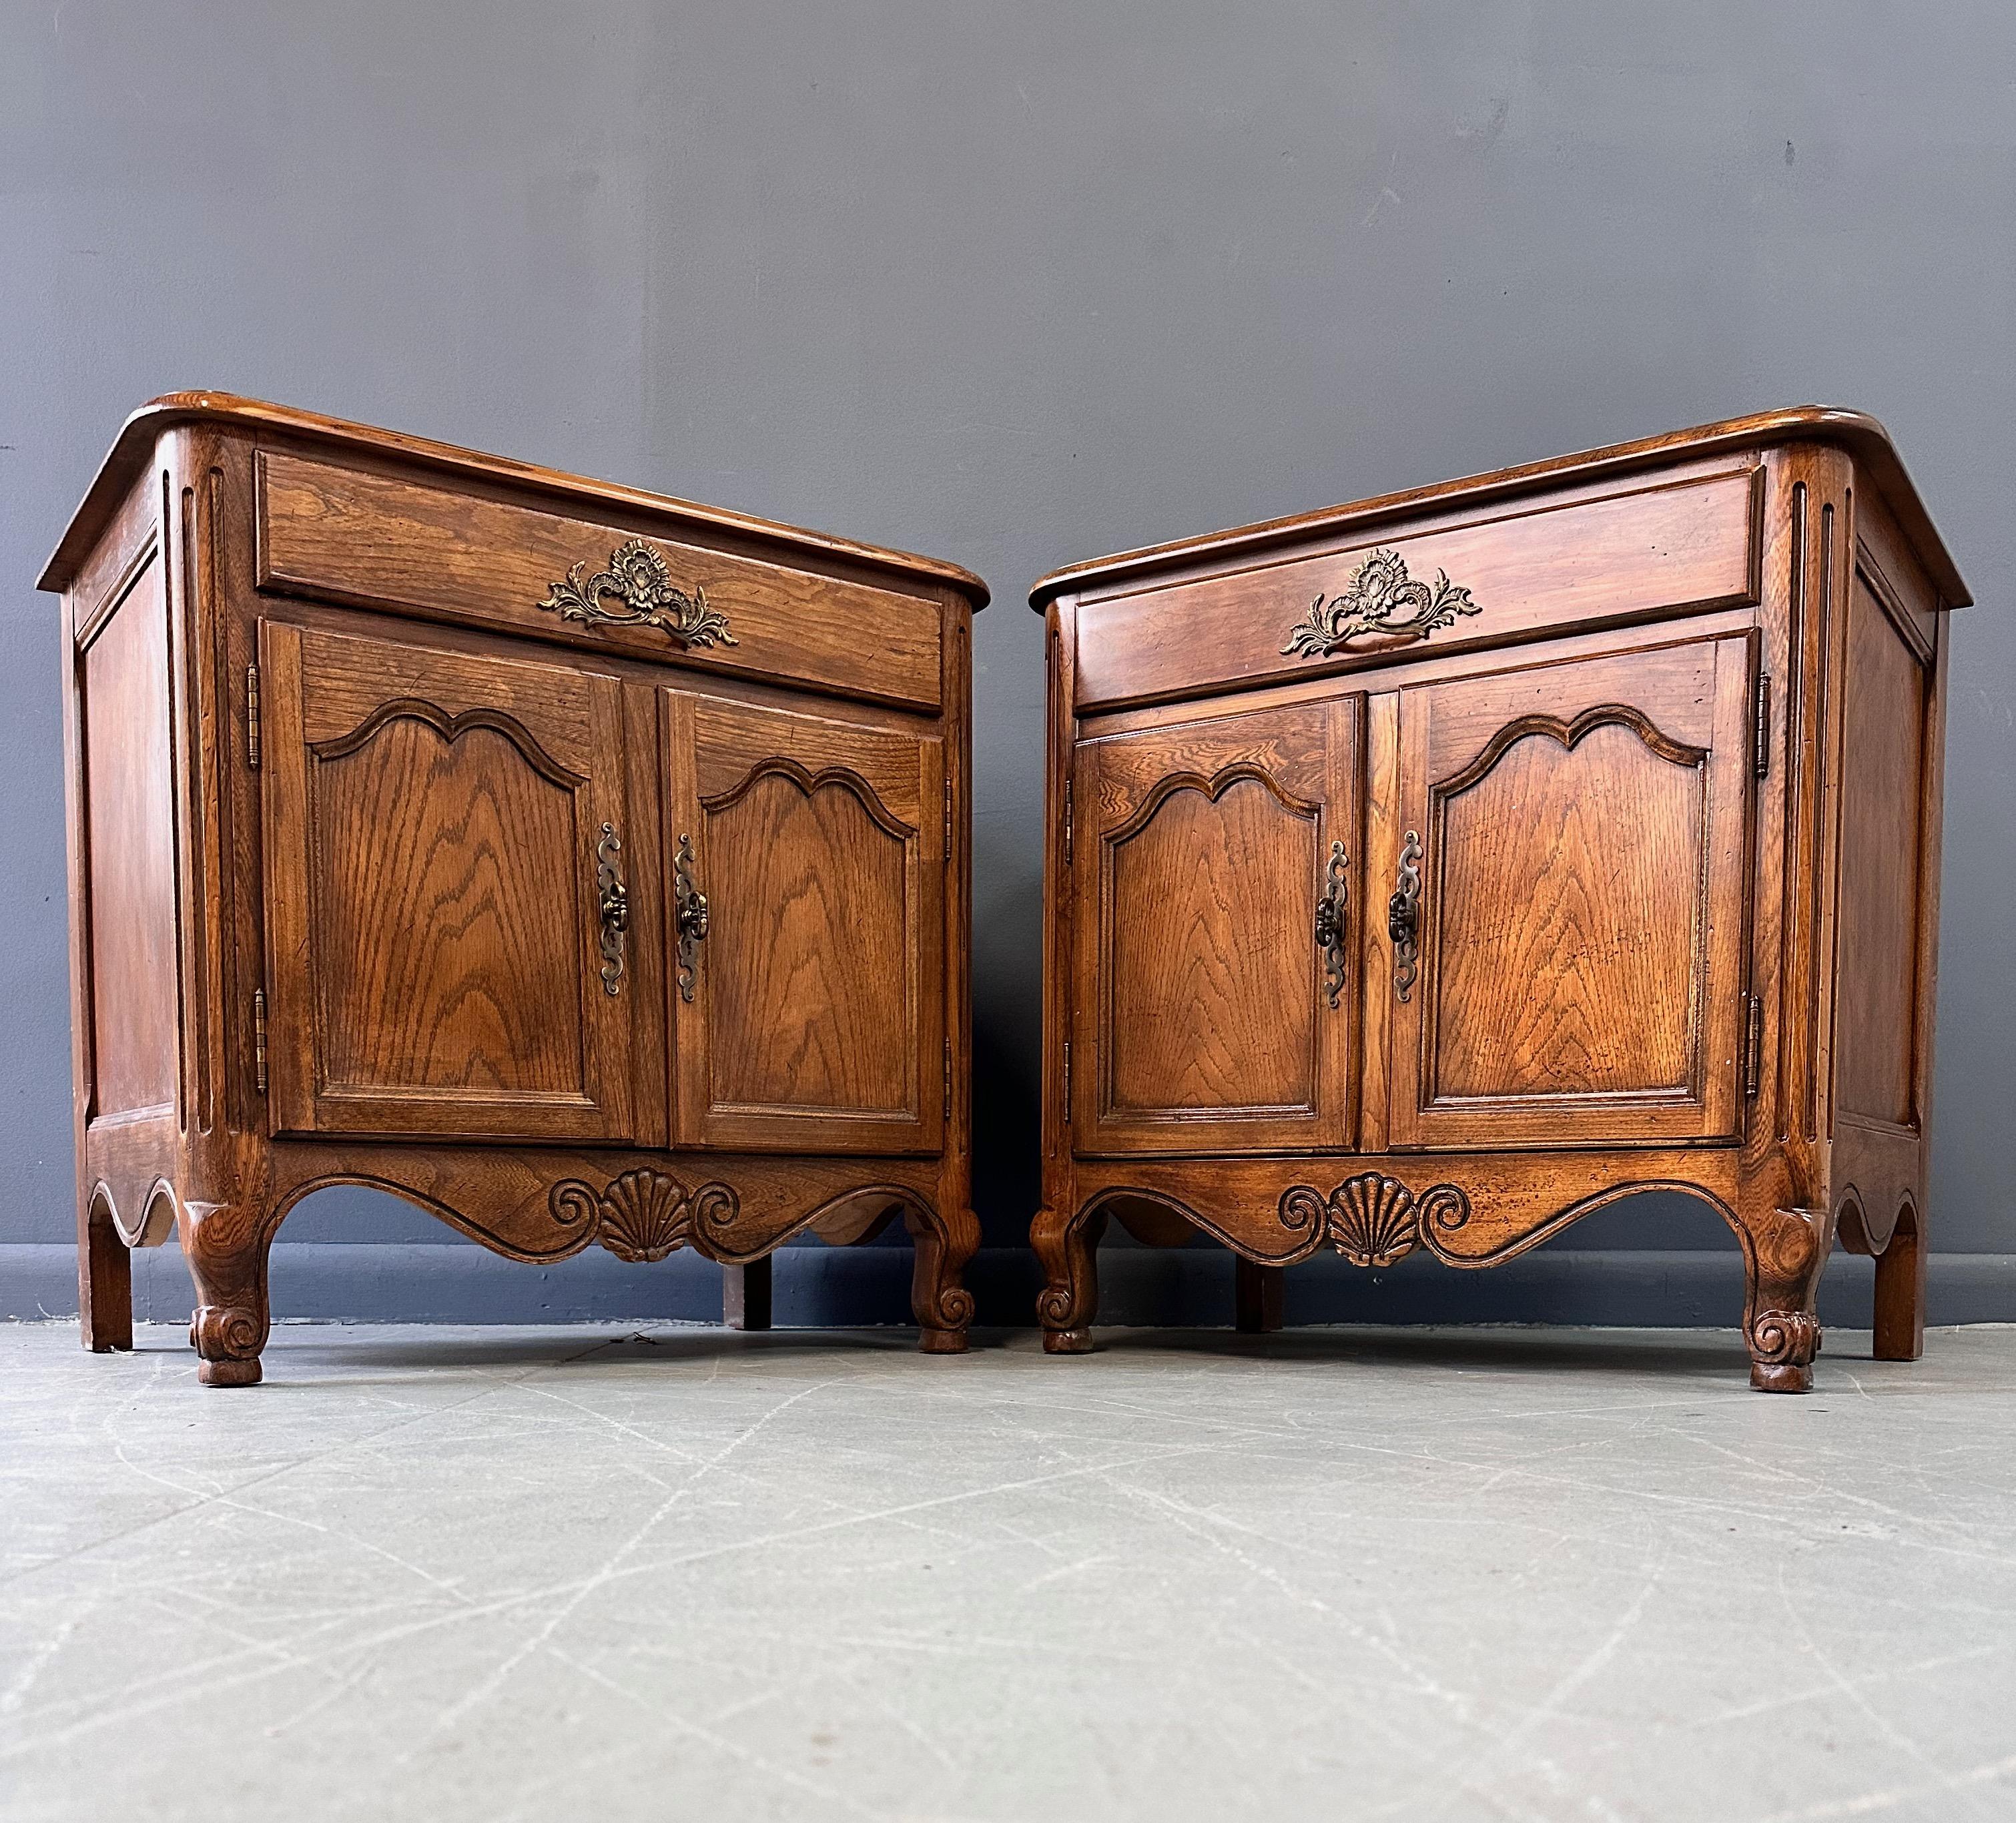 Wonderful and solid Baker nightstands in oak styled in a lovely French provincial motif. These stands have one drawer on top and two doors underneath with a good amount of space. These nightstands have been outfitted with an electrical plug on the